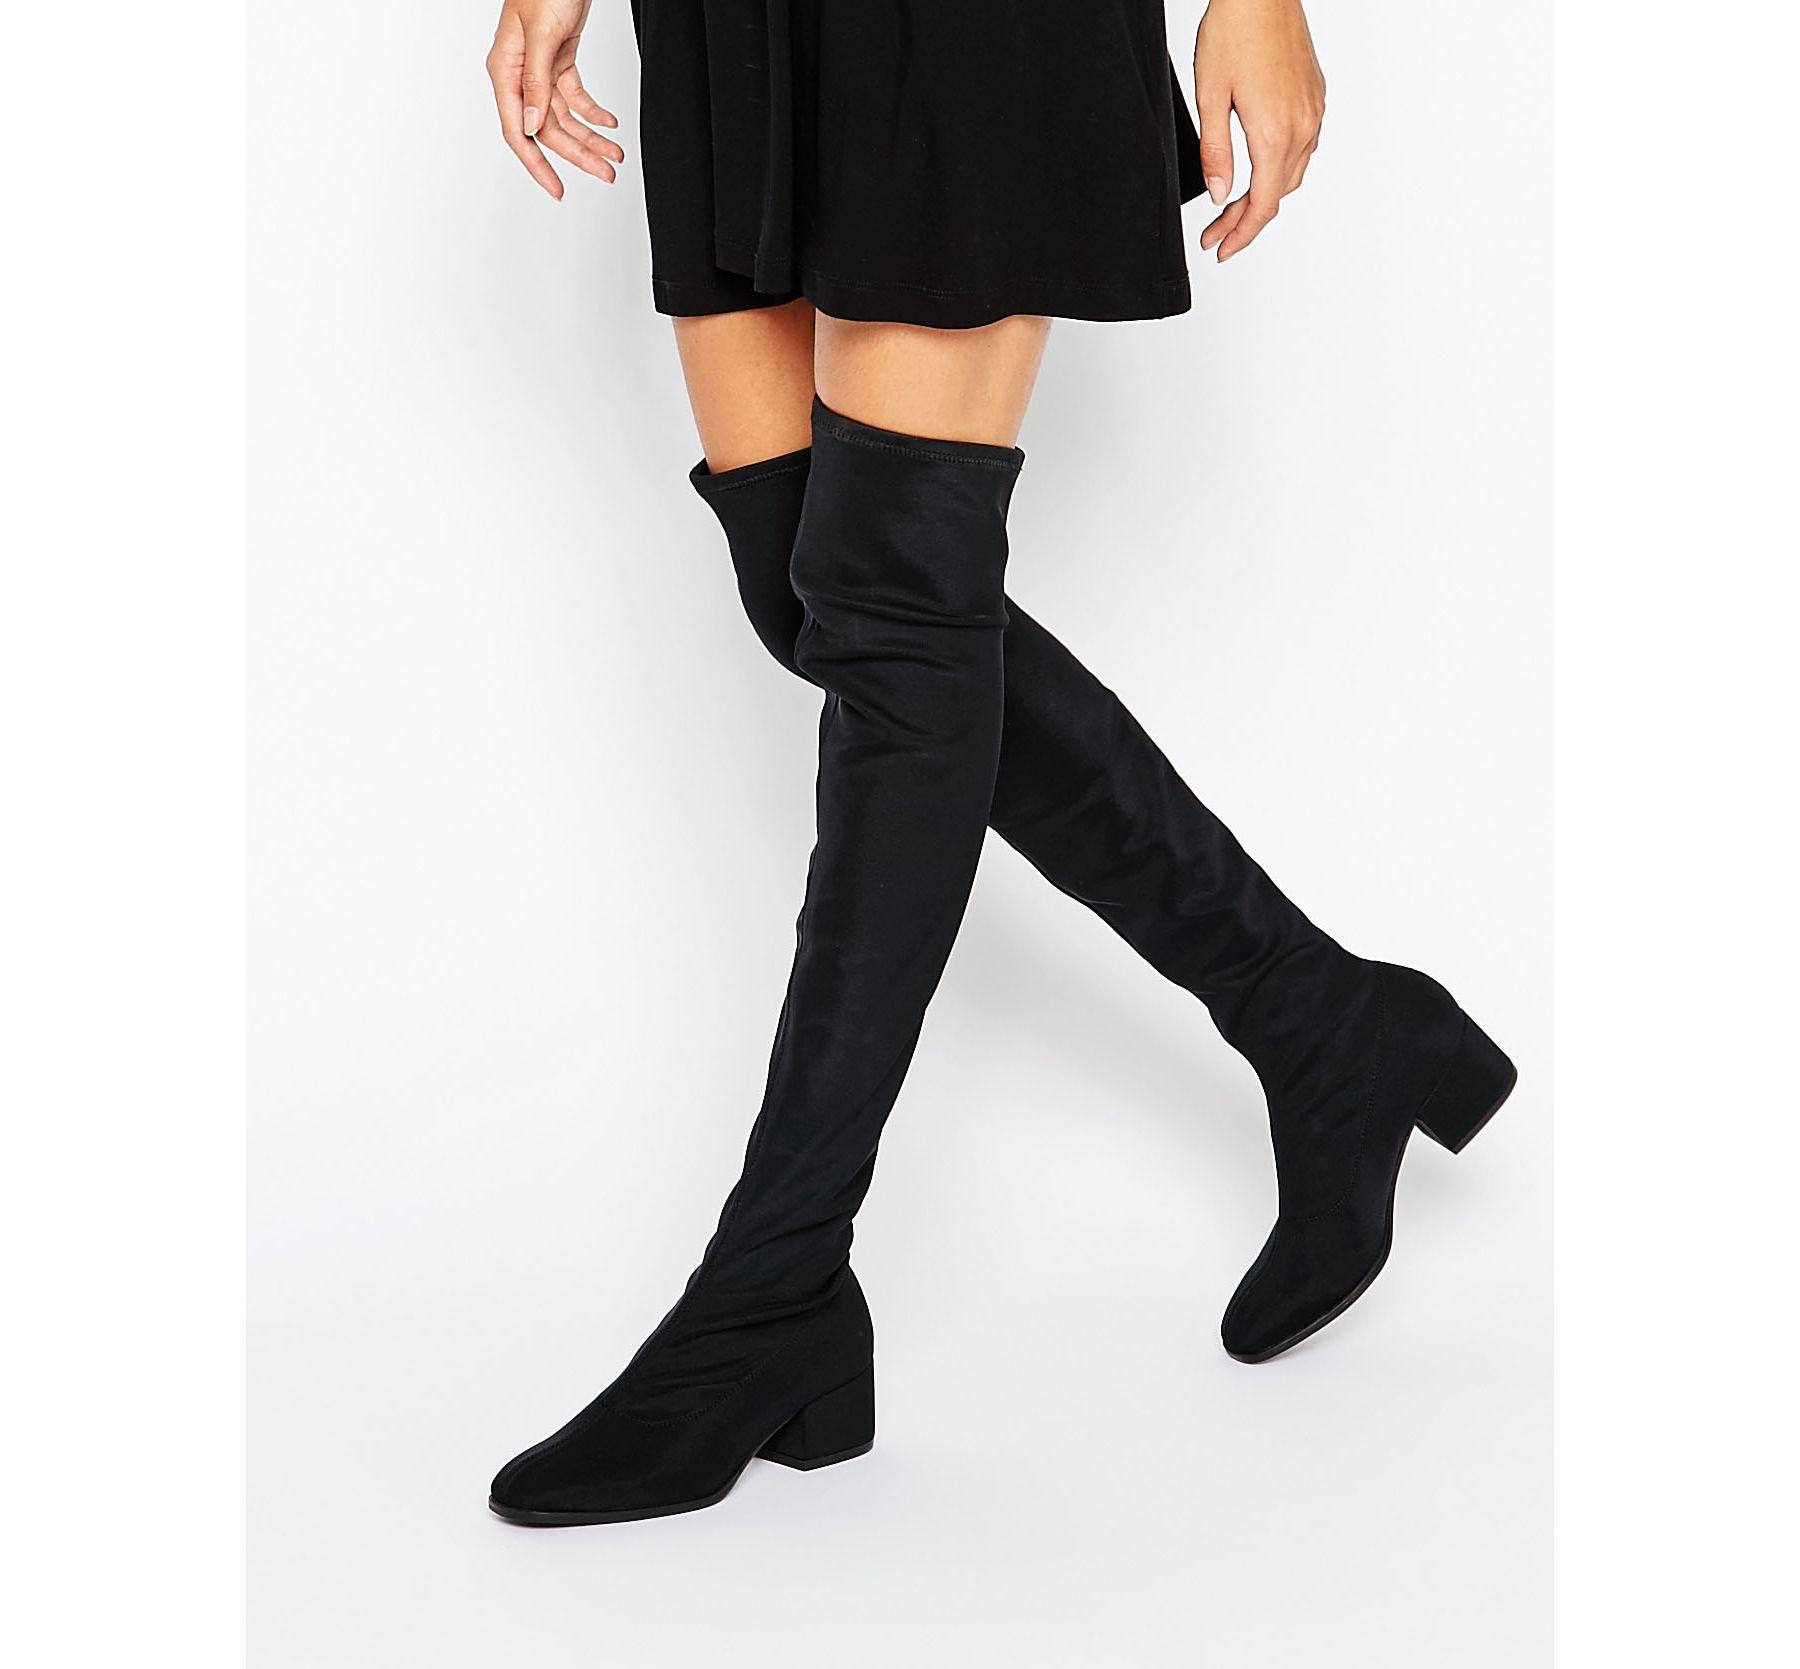 Vagabond Leather Daisy Over The Knee Boots - Black Textile - Lyst